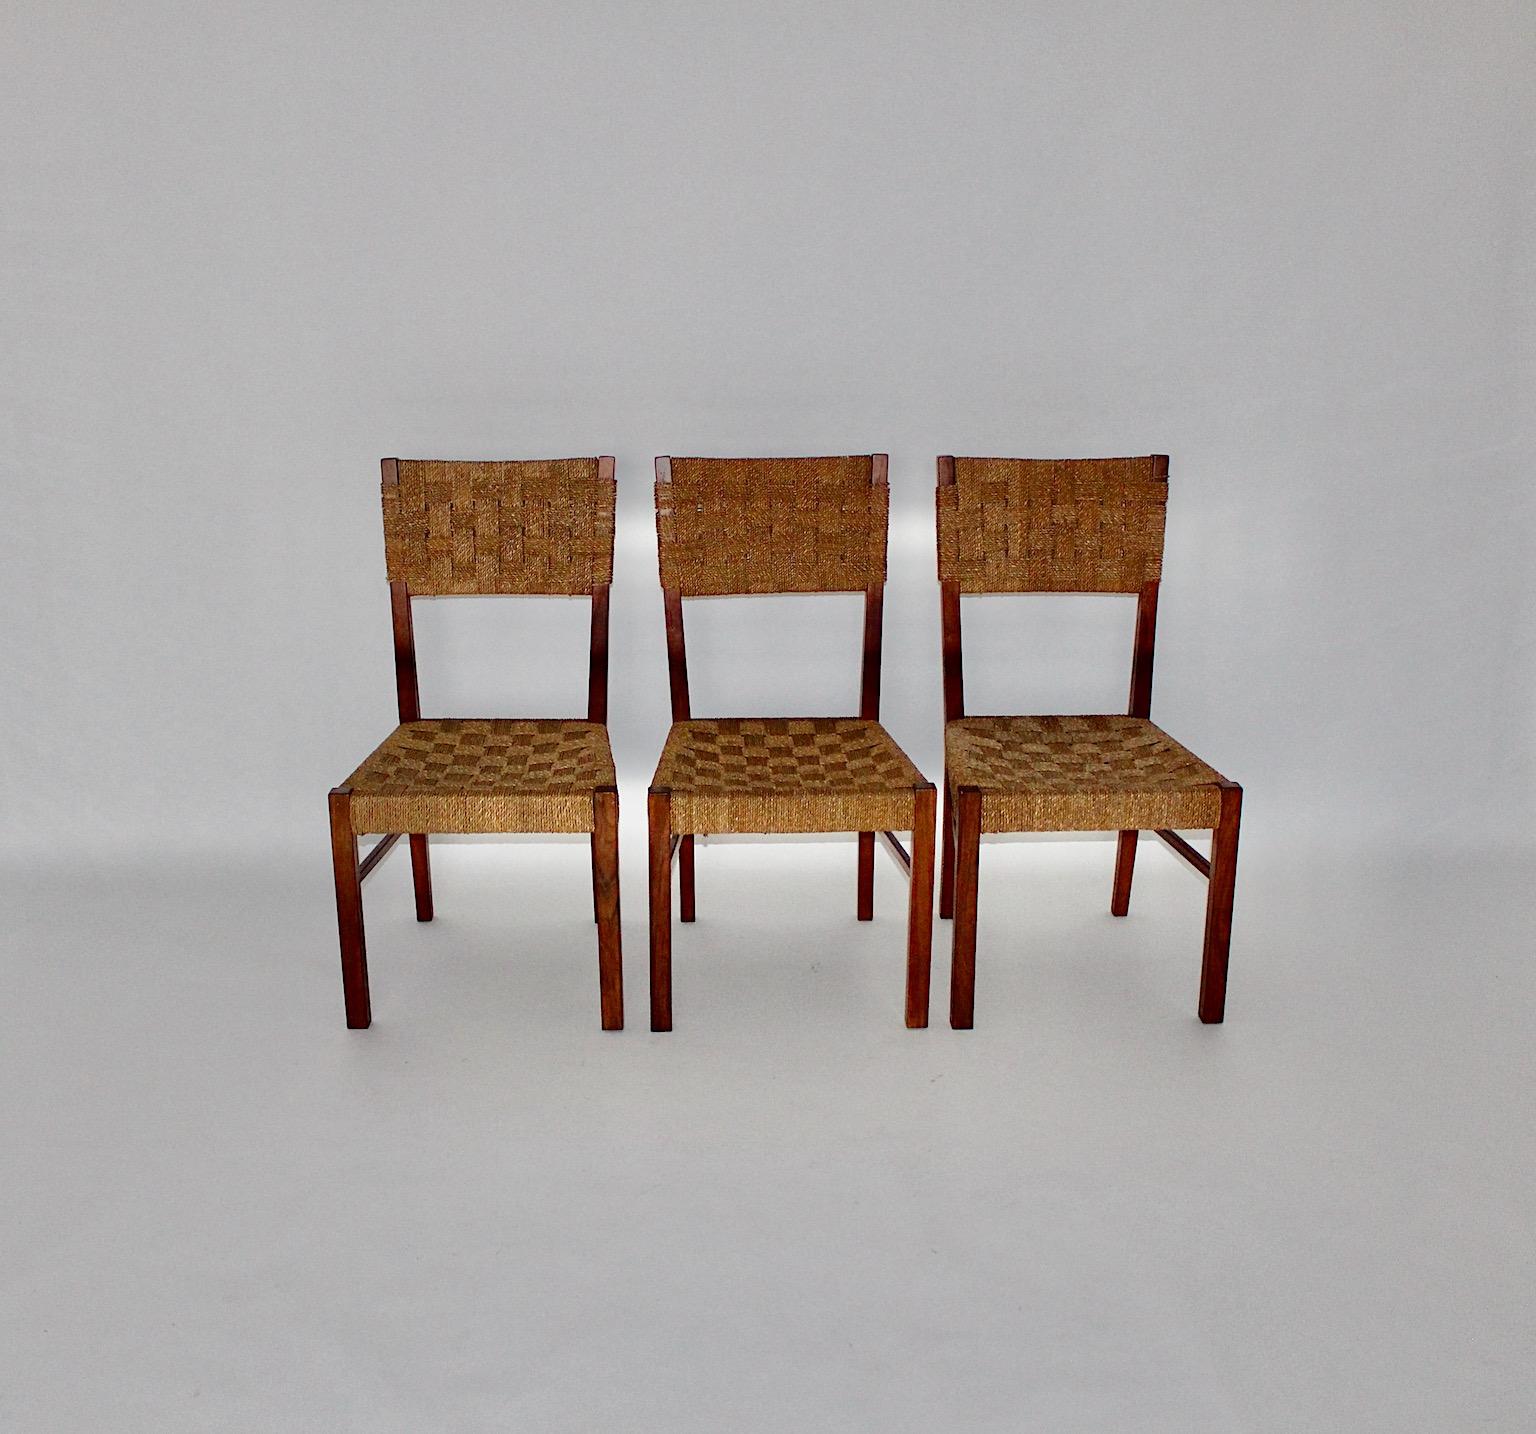 Mid-Century Modern three vintage dining chairs or chairs from walnut and sisal cords in brown color tone Austria 1950s.
Three minimalistic organic dining chairs or chairs feature solid walnut frame in beautiful brown color with wrapped sisal cord